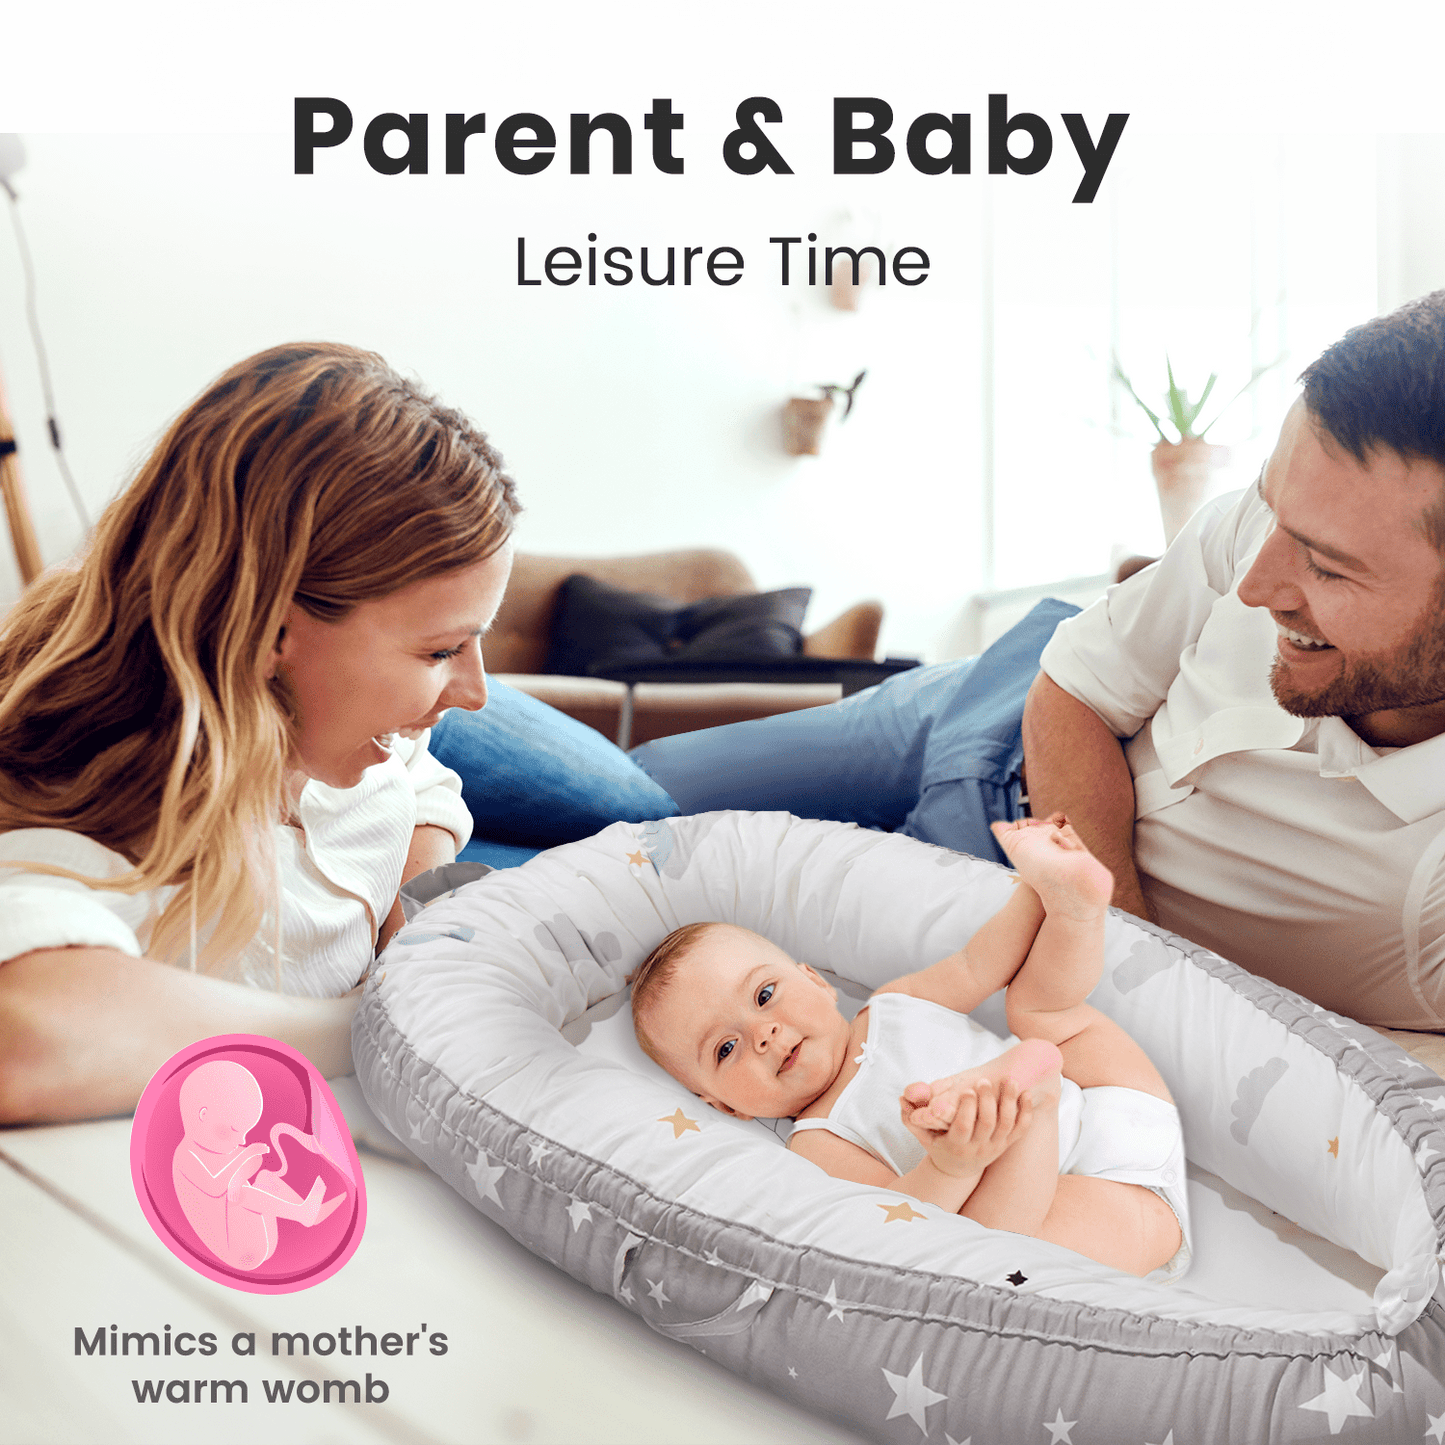 Baby Lounger Pillow - Newborn Lounger for 0-12 Months, Breathable & Portable Infant Lounger Pillow - Adjustable Cotton Soft Baby Floor Seat for Travel, Baby Newborn Essentials Must Haves